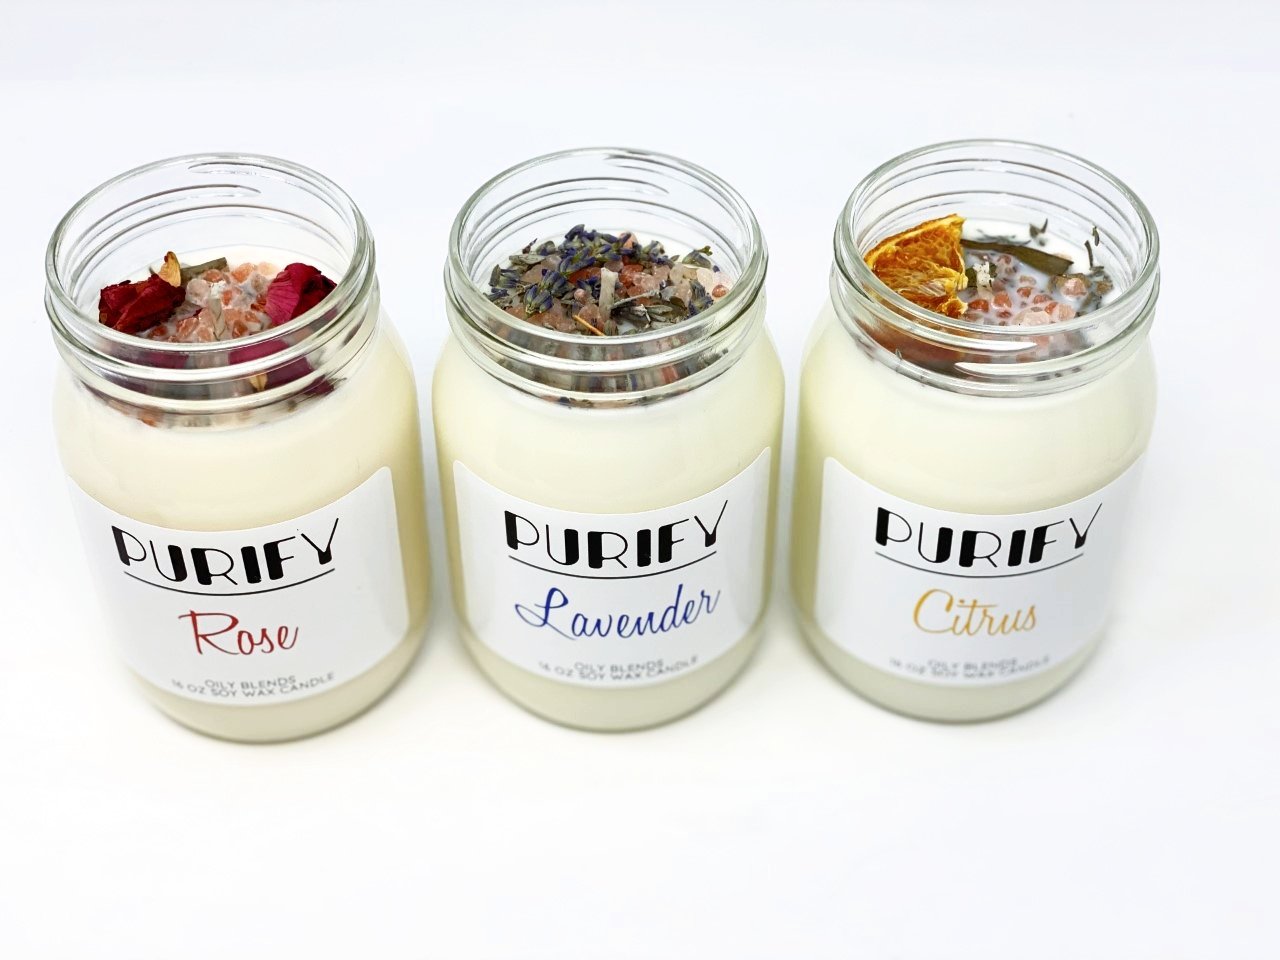 Jumbo Purify Candles with Herbs and Pink Salt - 100 Hour Burn Time Soy Wax Candles - Oily BlendsJumbo Purify Candles with Herbs and Pink Salt - 100 Hour Burn Time Soy Wax Candles